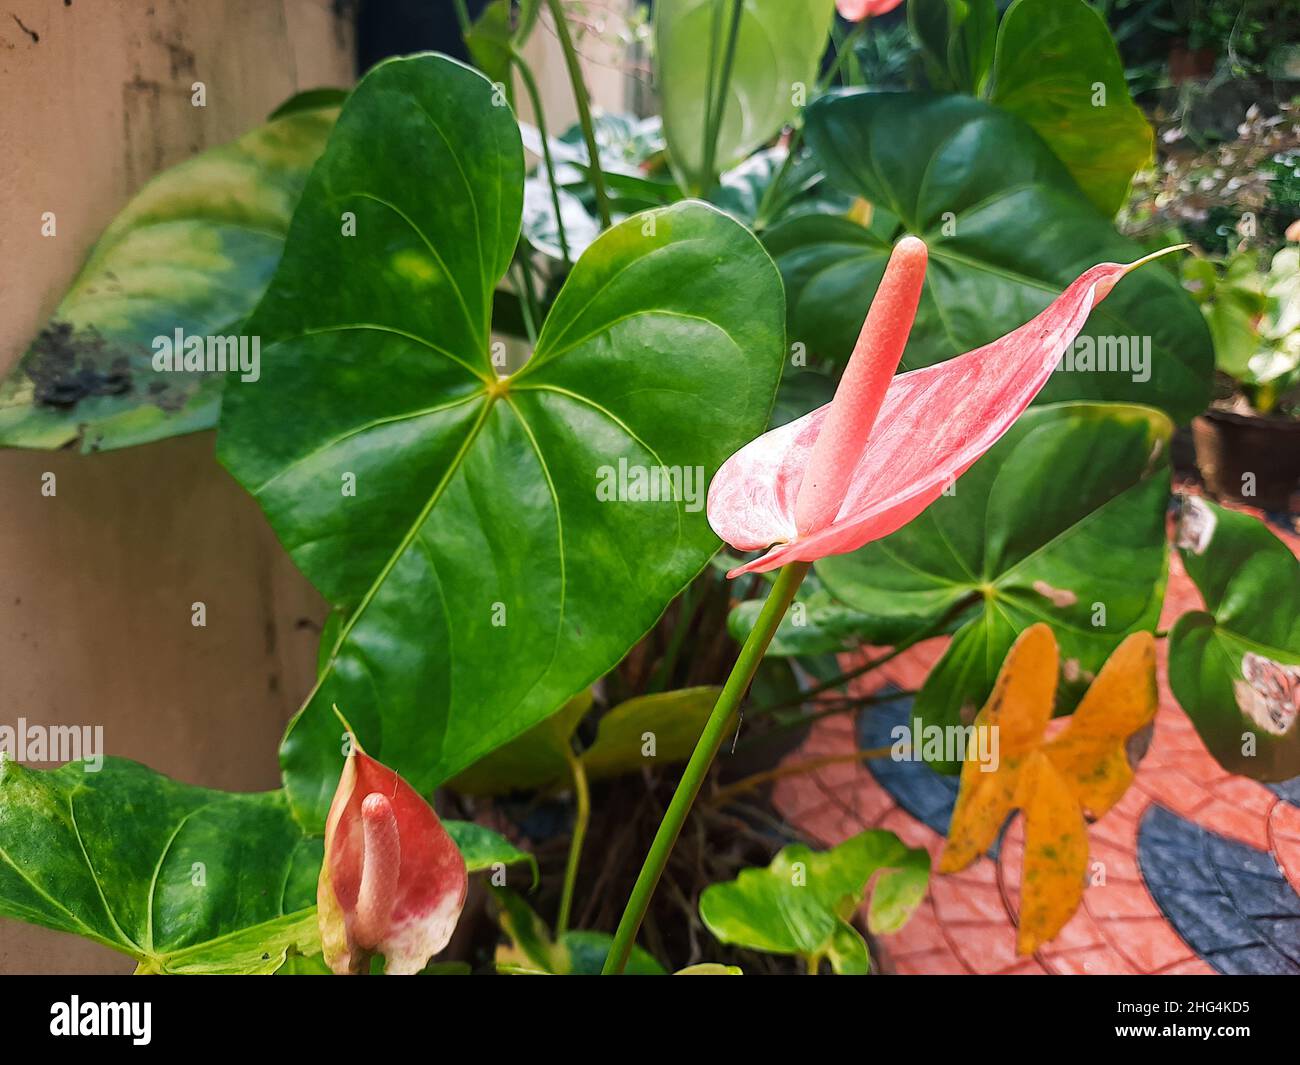 Anthurium red in color Stock Photo